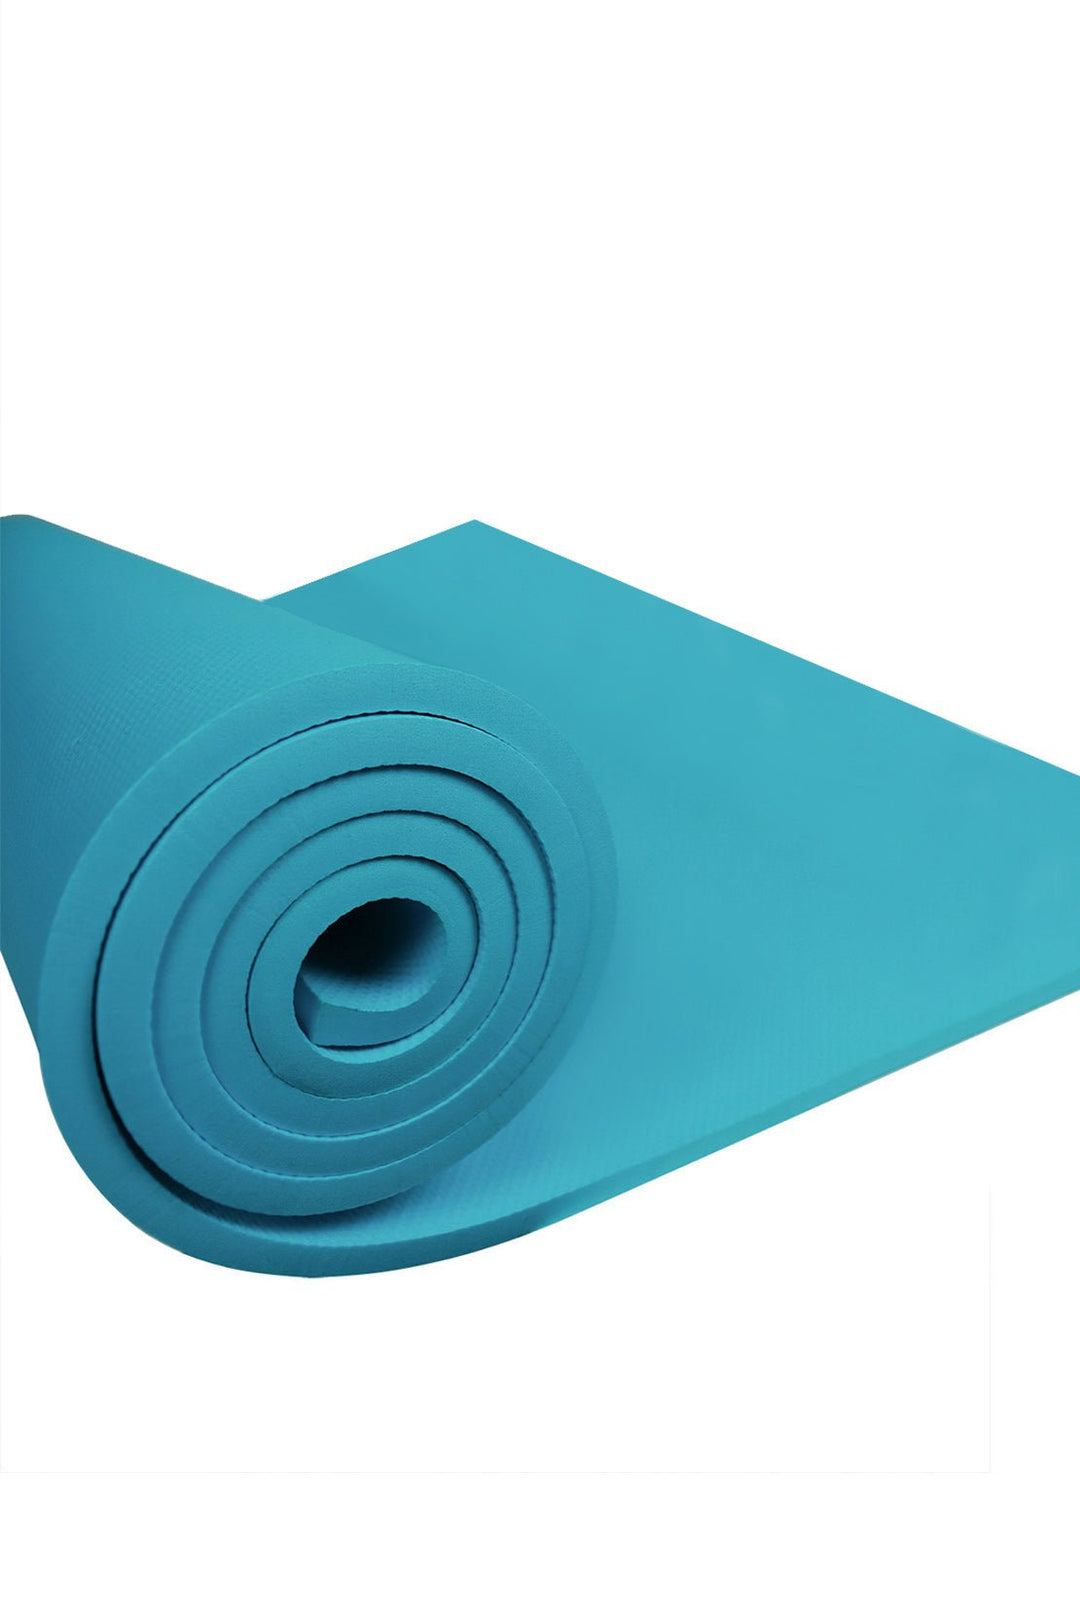 10 mm Thick Yoga Mat for Indoor and Outdoor Use, qua - V Surfaces